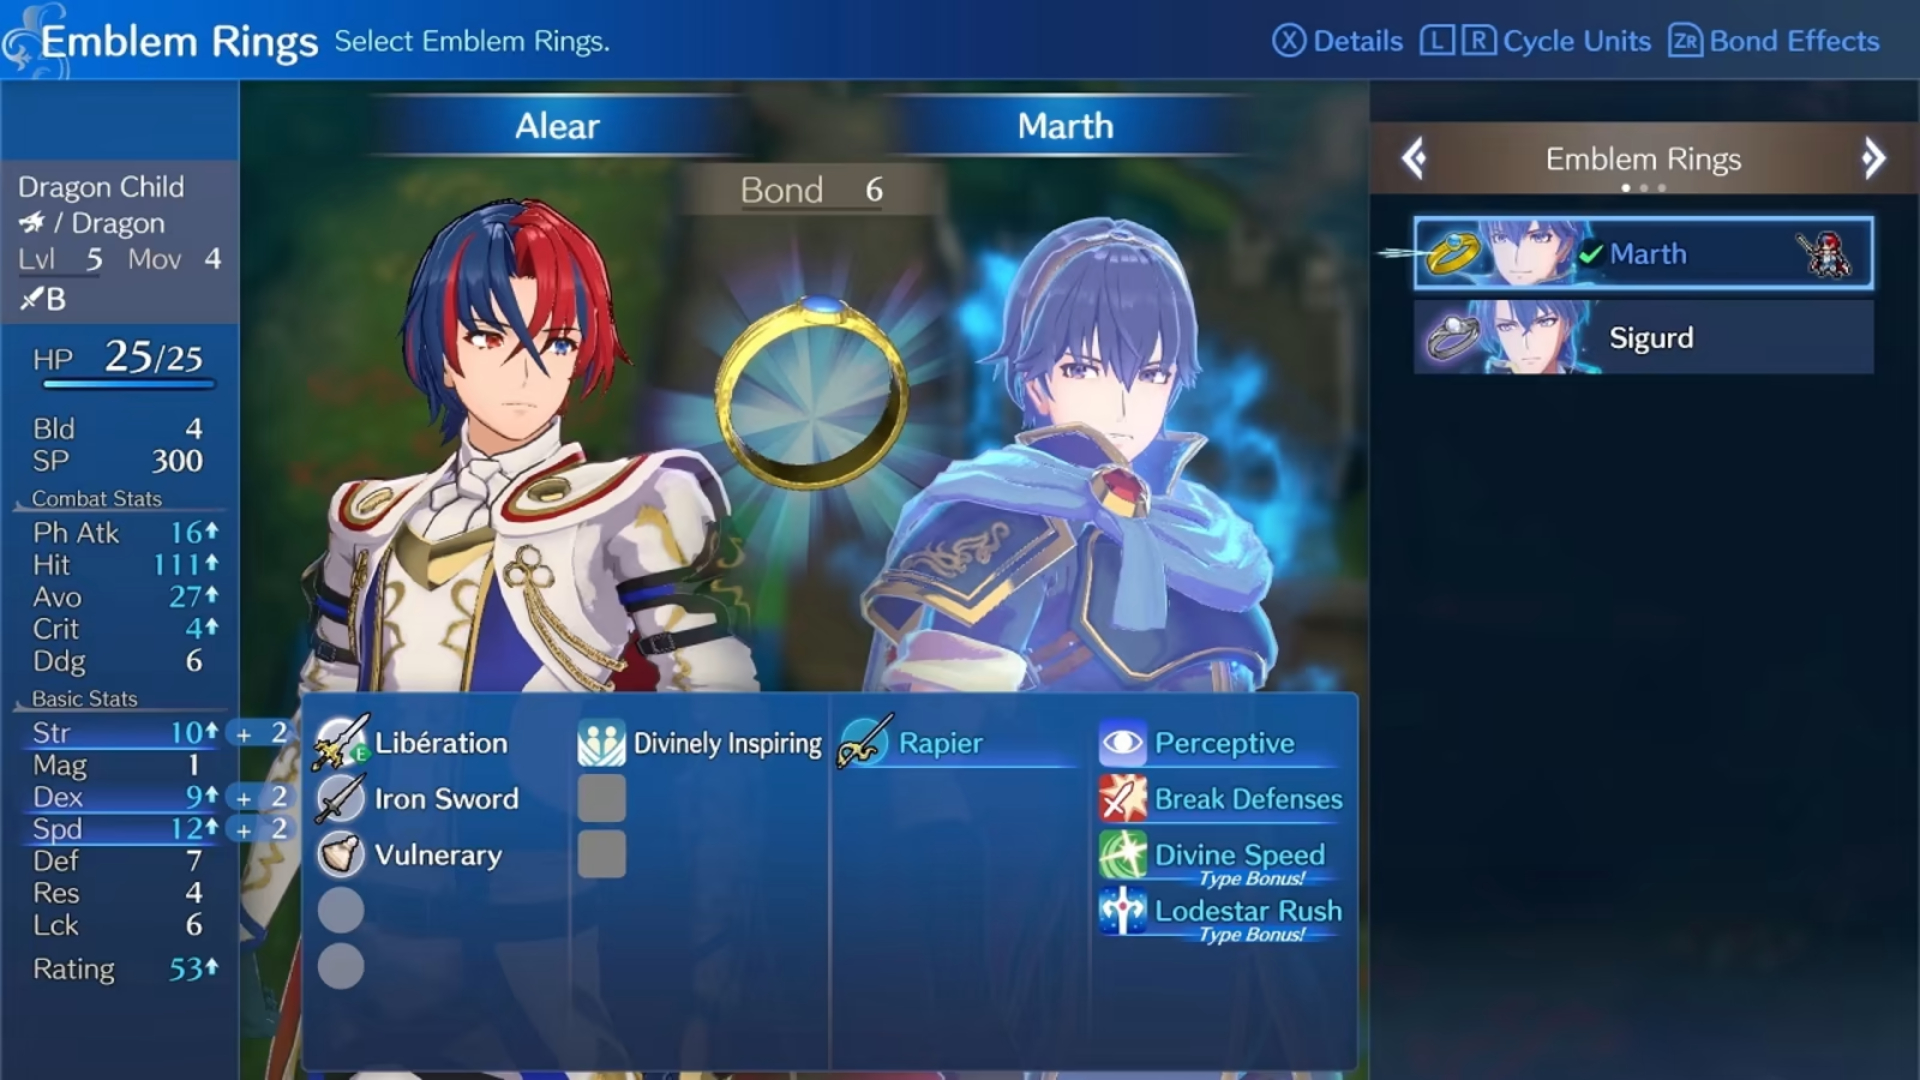 A screenshot of Fire Emblem Engage's menu, in which a player is selecting Marth's Emblem Ring for Alear. Stats and skills are on the left and center of the image respectively.